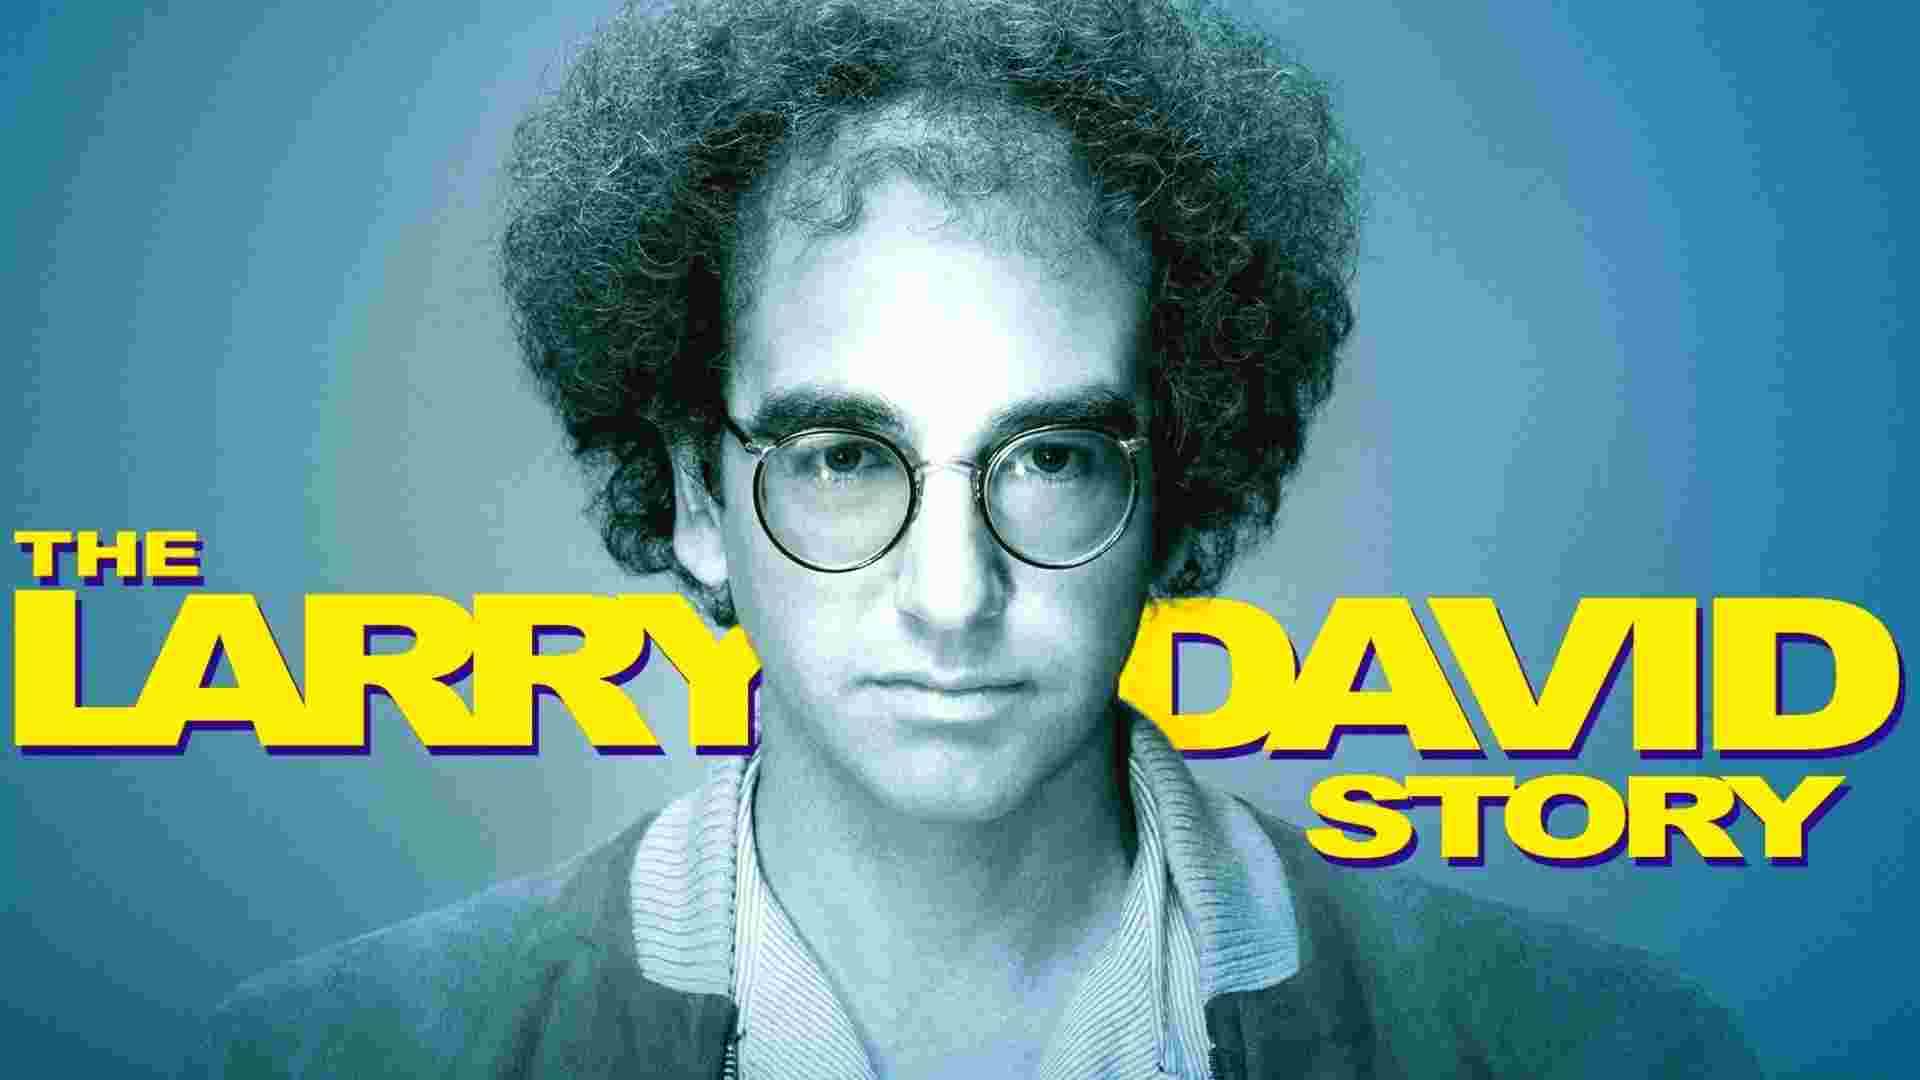 The Larry David Story Parents Guide and Age Rating | 2022